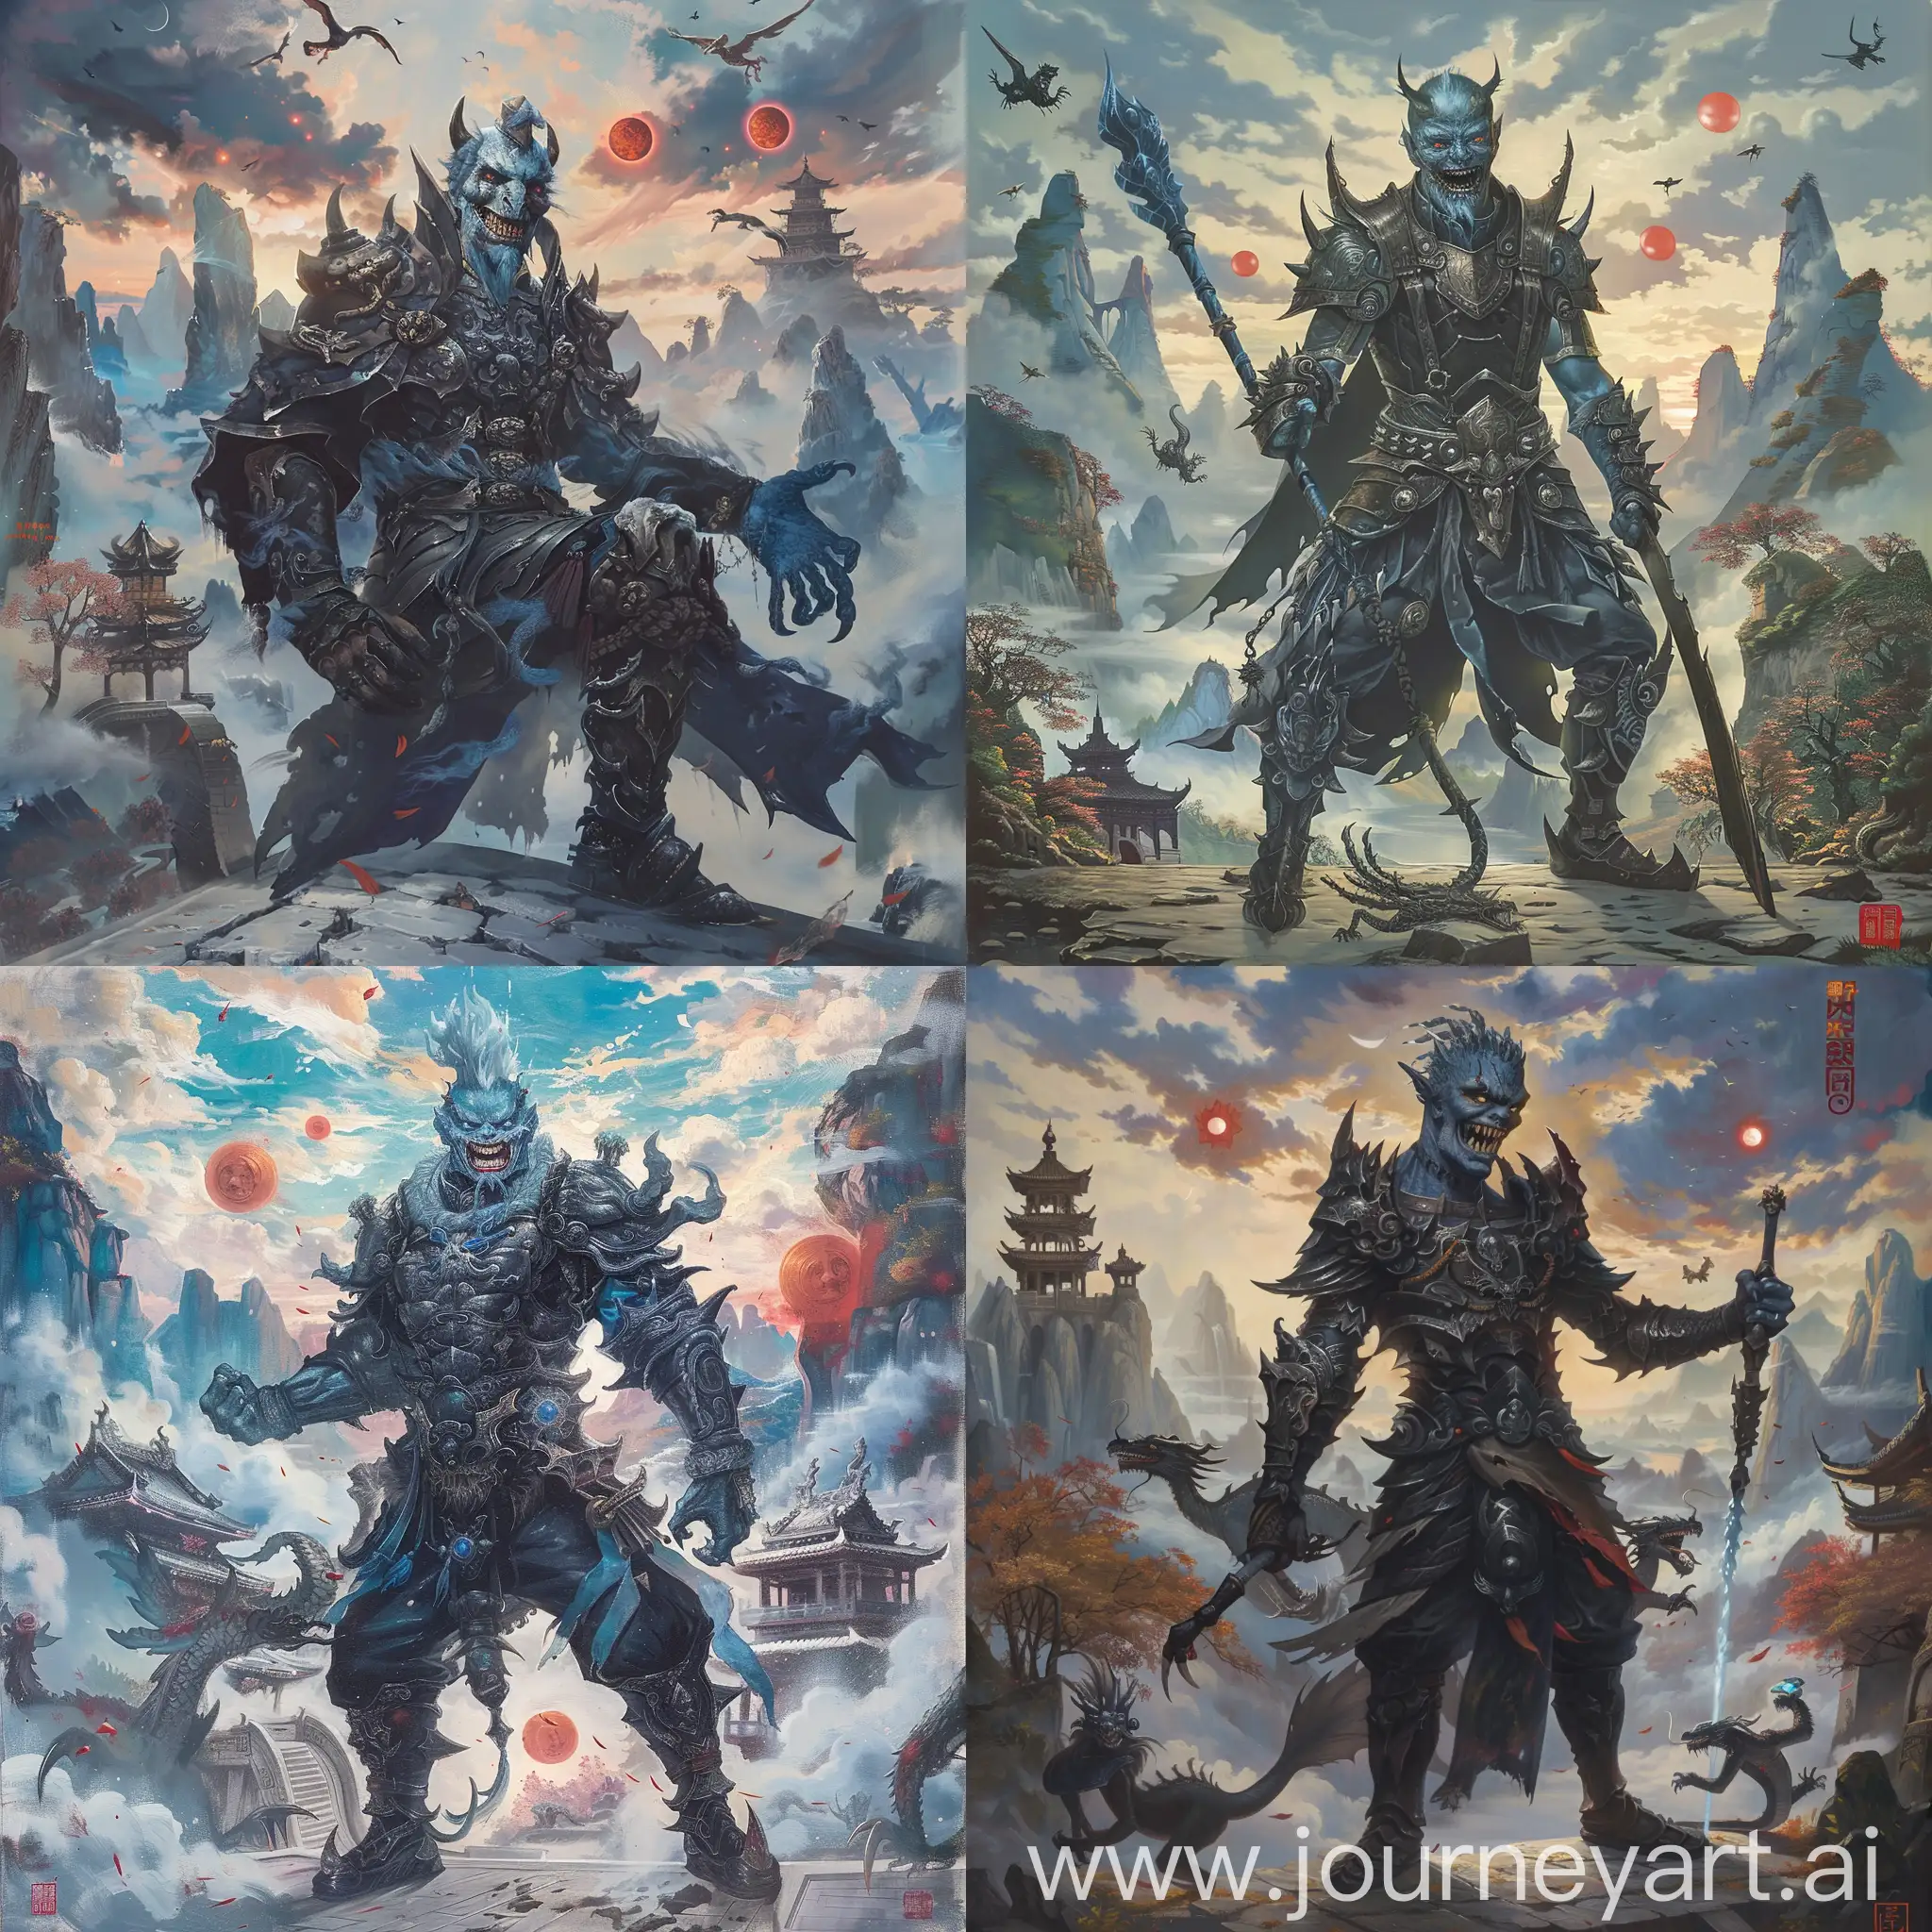 Historic painting style:

a blue skin Night King, he has an evil smile, he is in black color medieval Chinese style armor and boots, he holds a Chinese iced sword in right hand, 

Chinese Guilin mountains and temple as background,  evil iced dragons and three small red blood suns in cloudy sky.